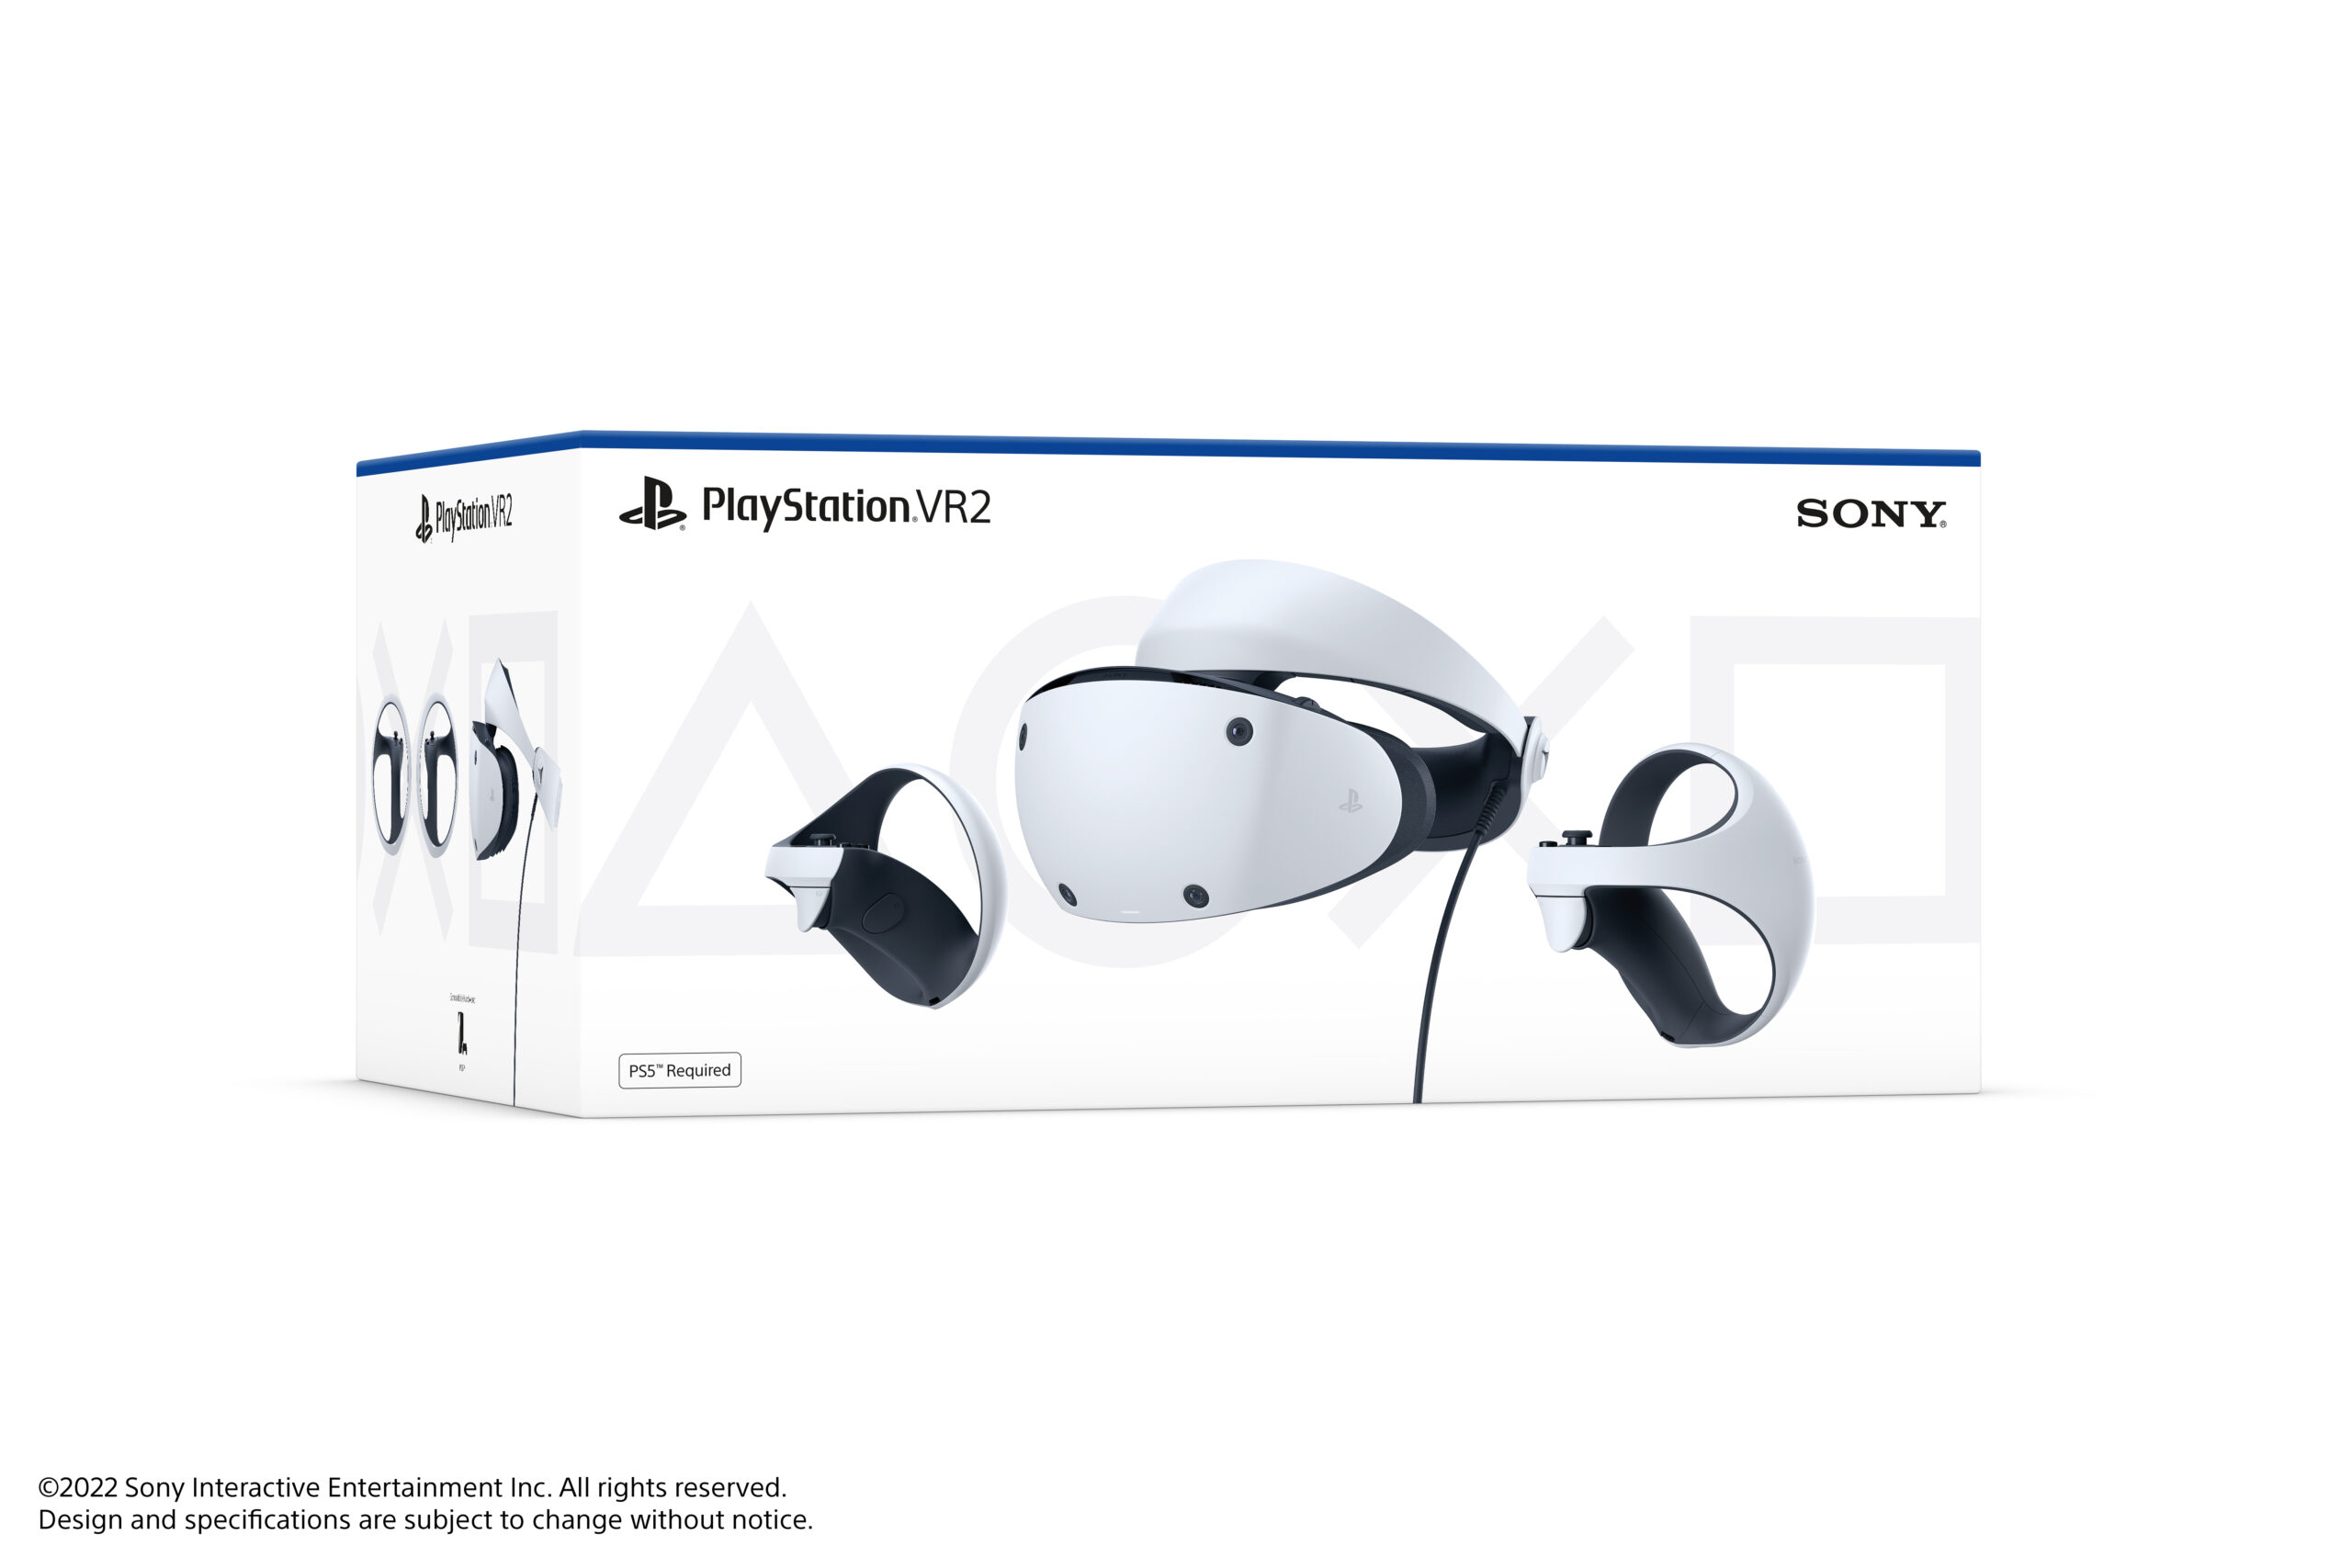 Is PSVR 2 worth the price on PS5?